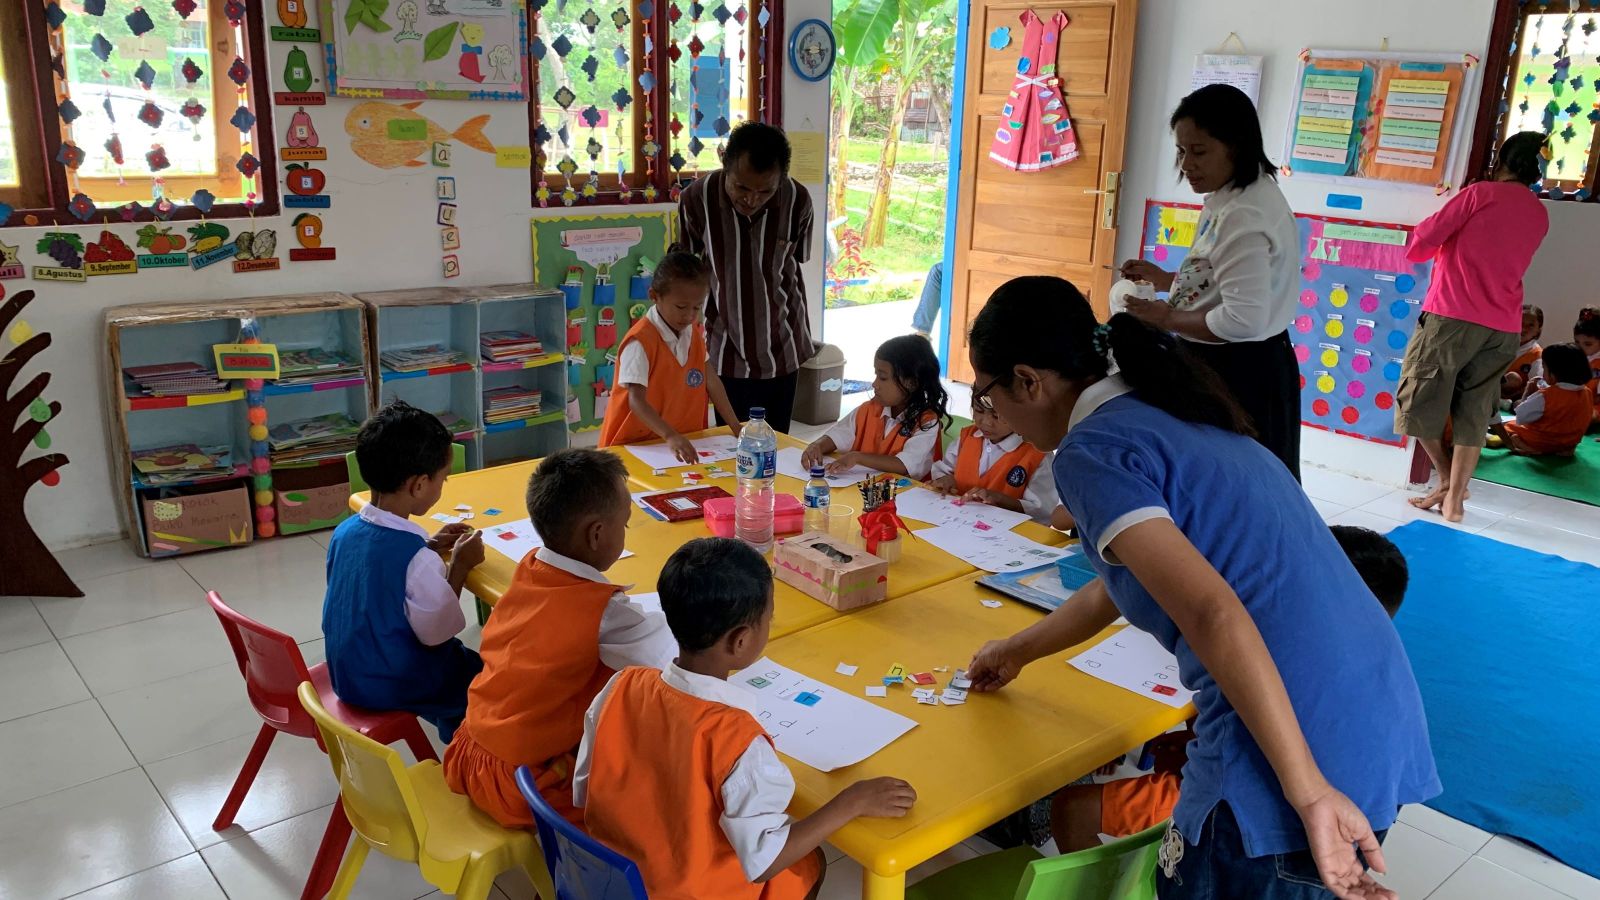 Children working at table in a colourful classroom.